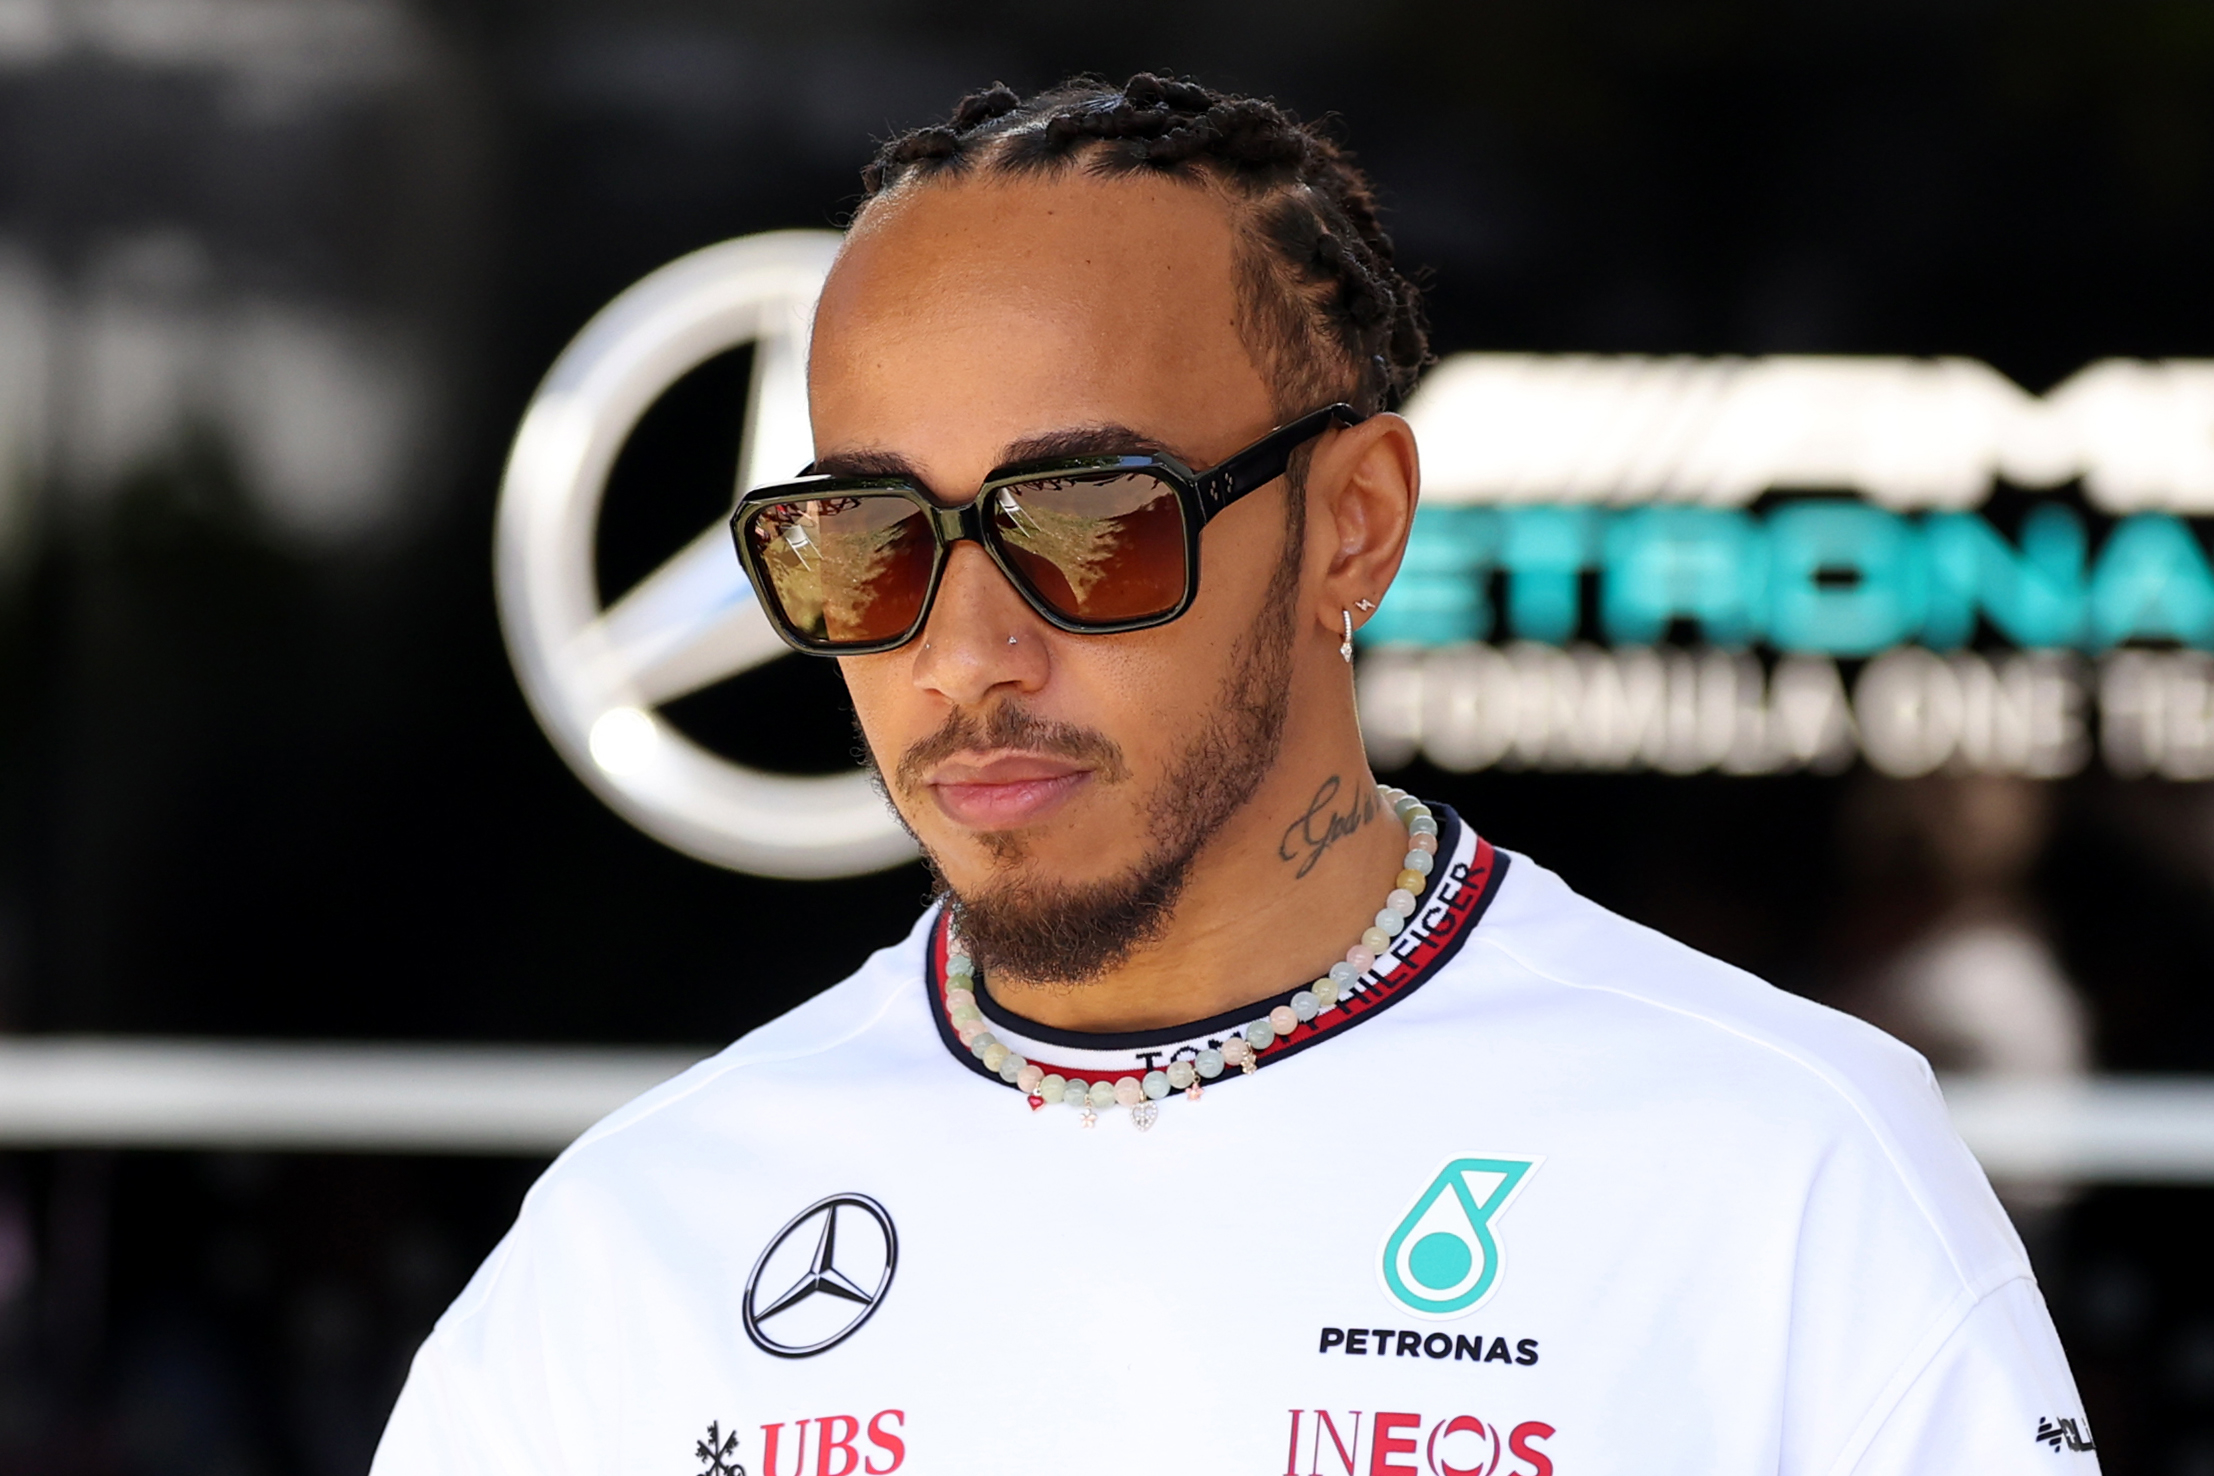 Lewis Hamilton in a white team jersey with sponsor logos, wearing sunglasses